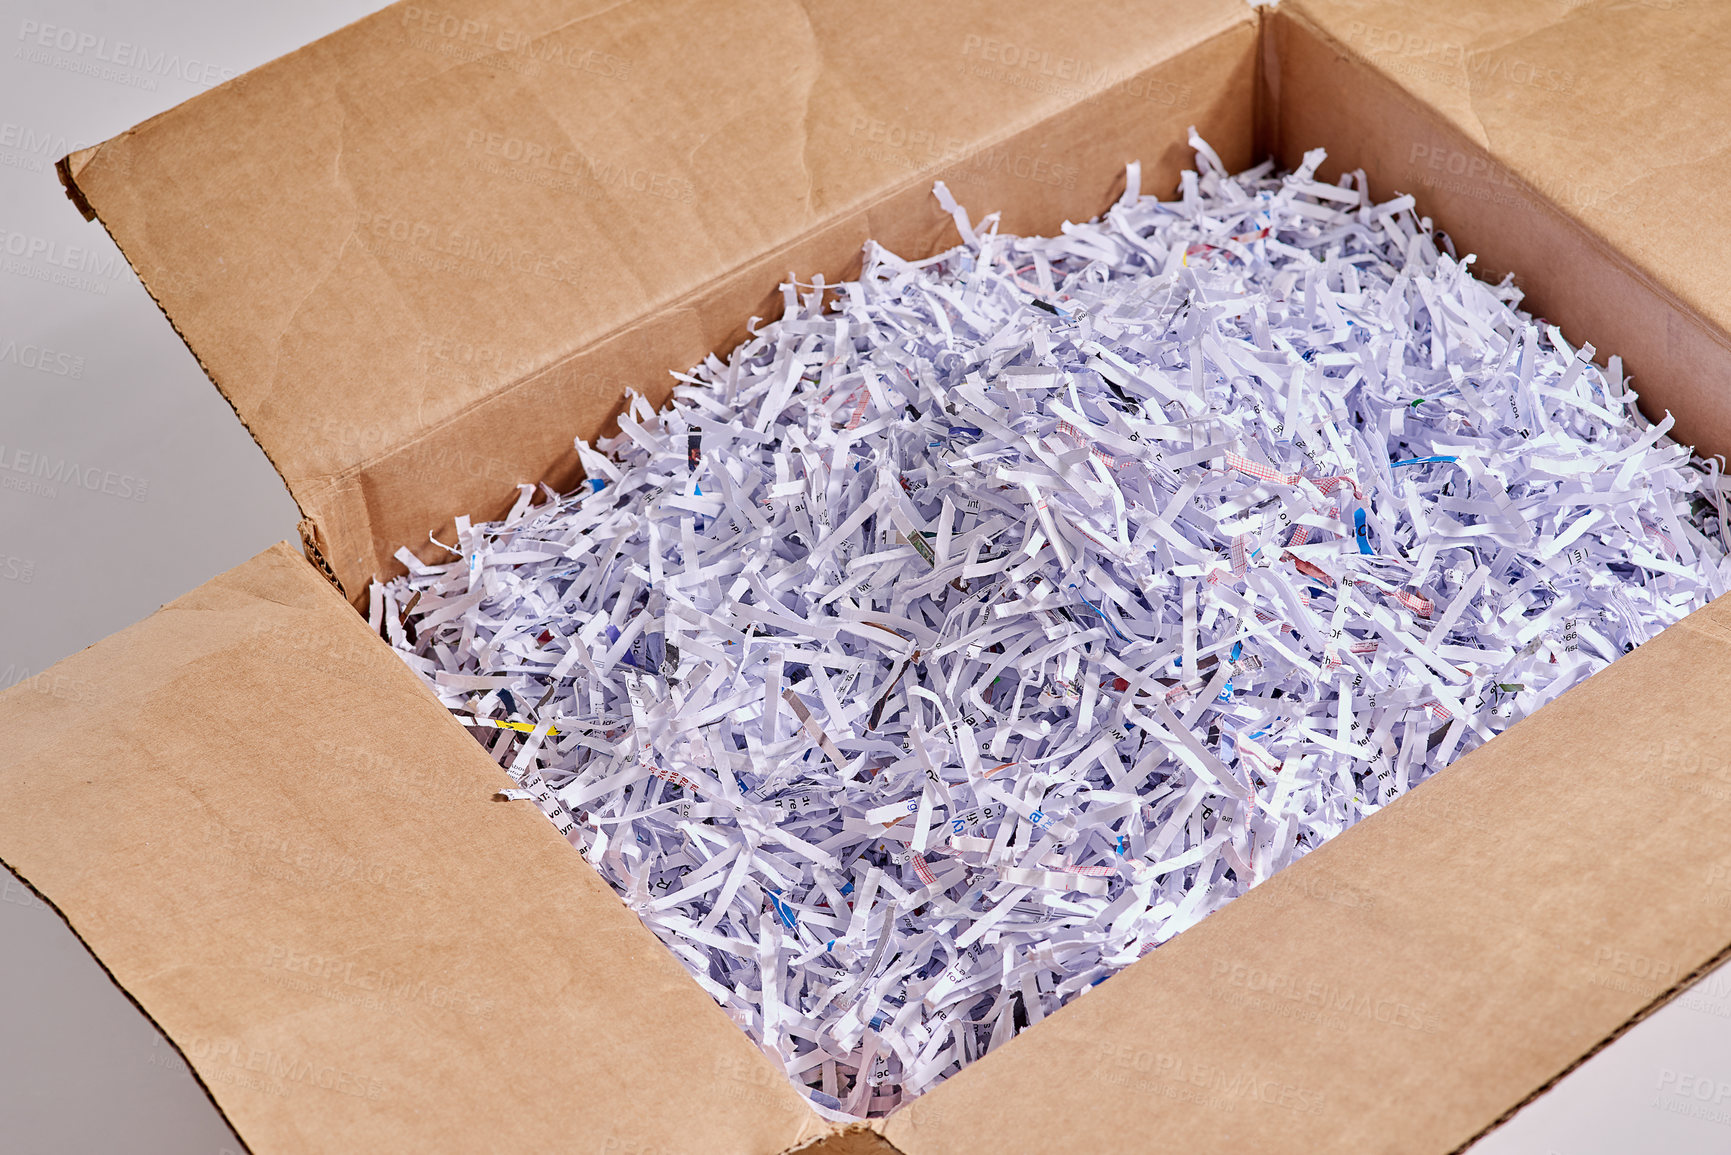 Buy stock photo Studio shot of shredded paper in a cardboard box against a grey background